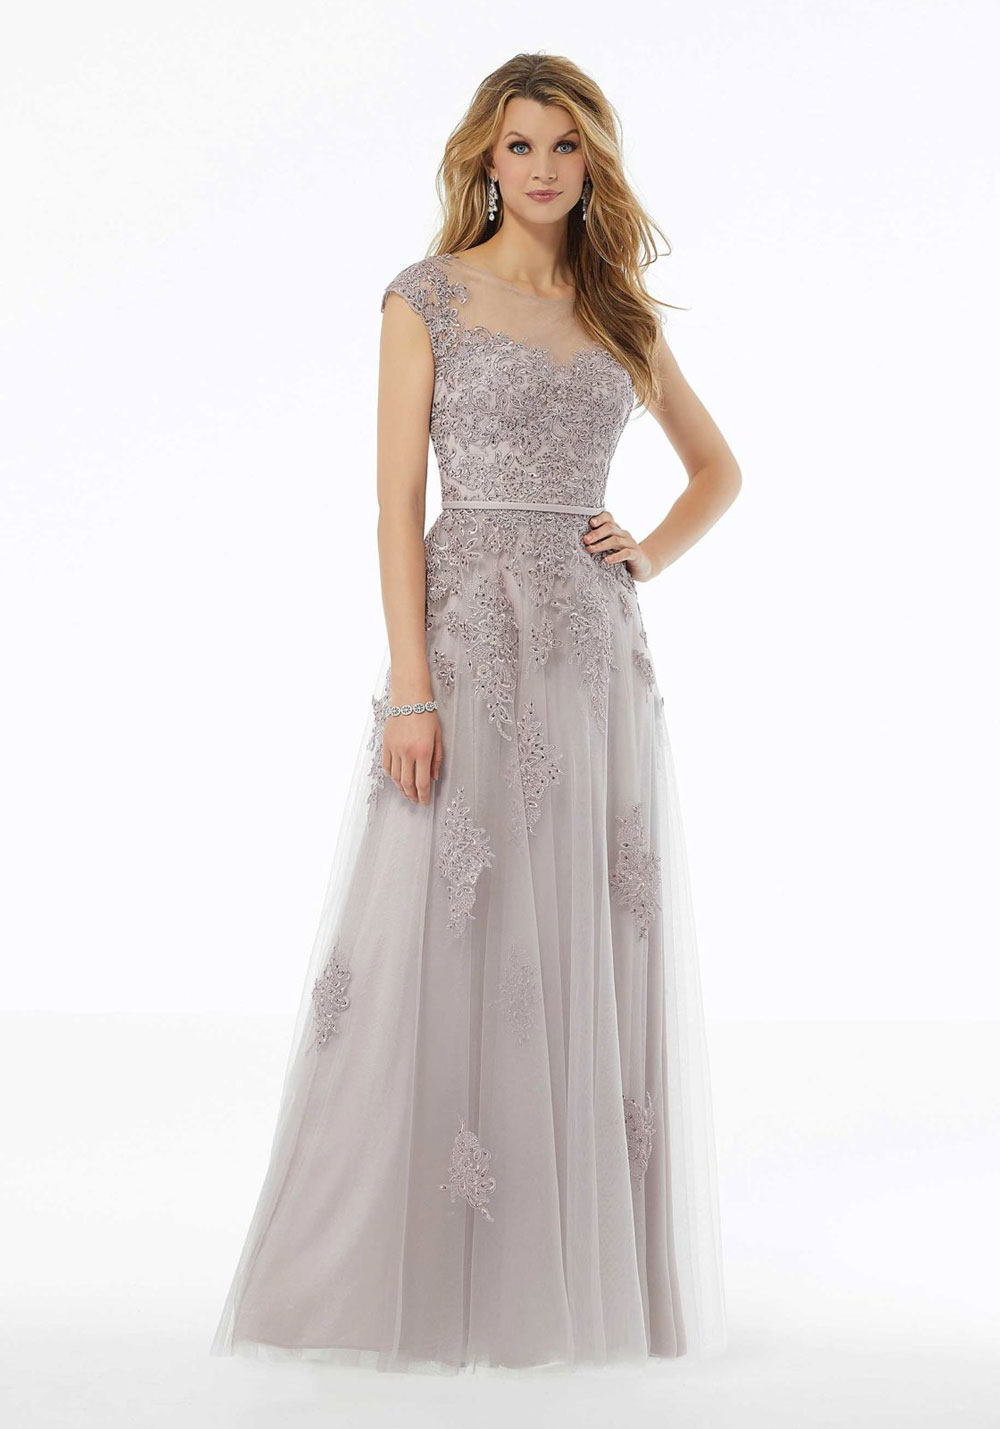 A-Line evening gown with beaded lace appliqués